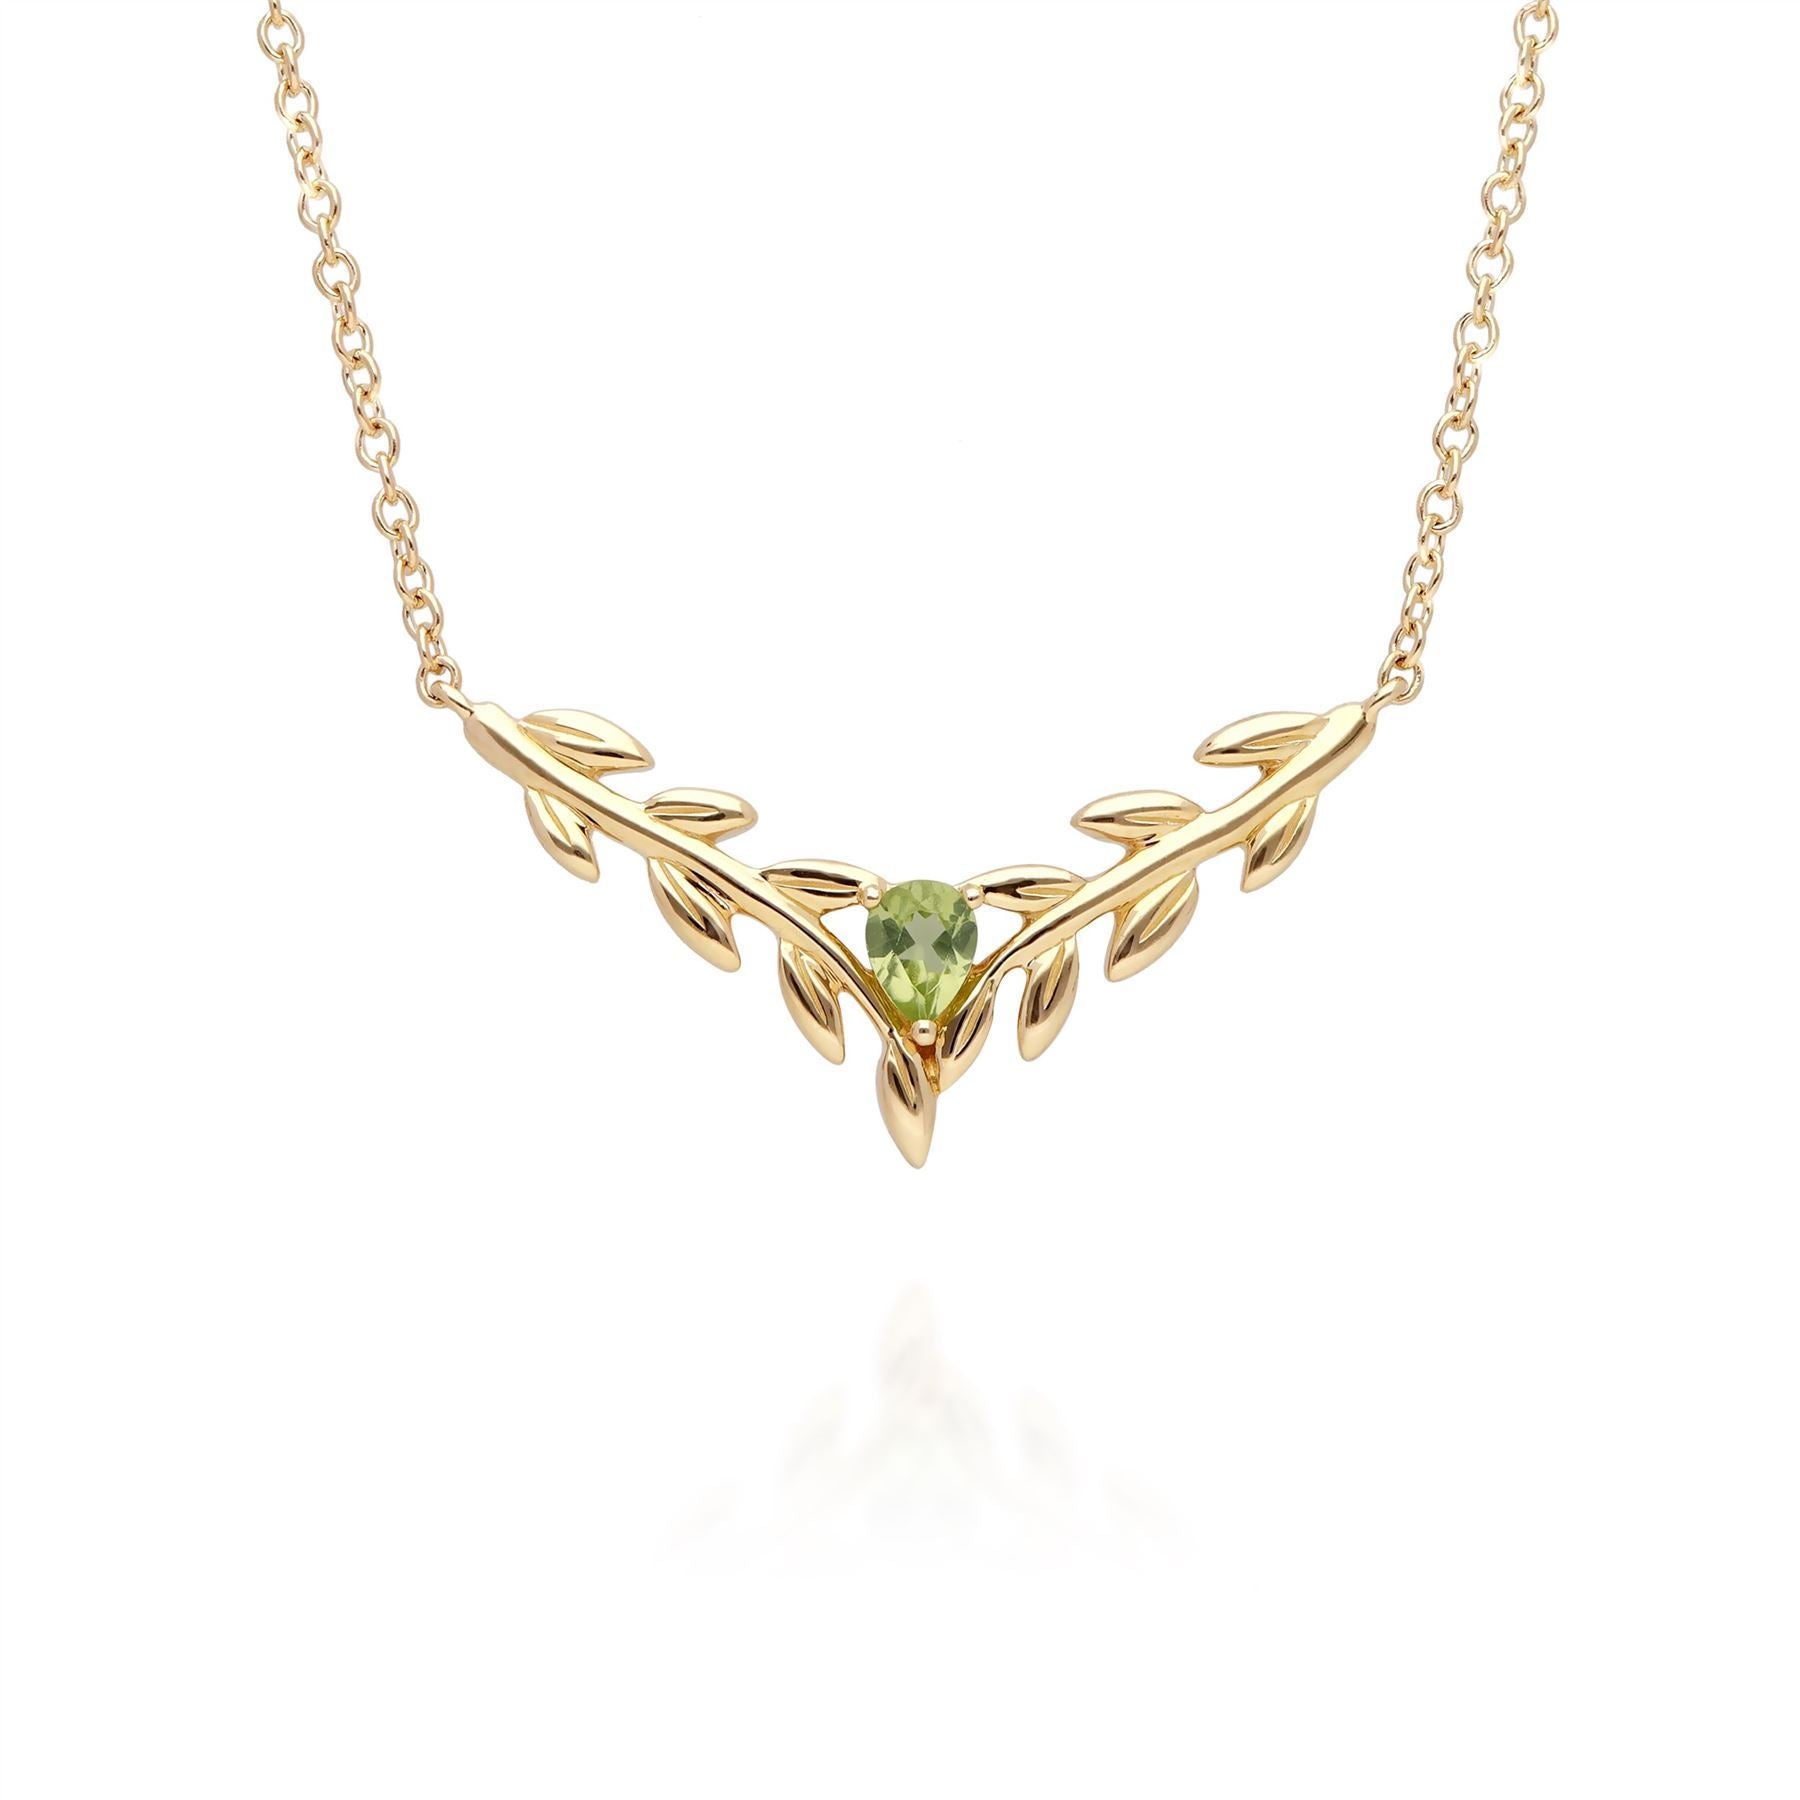 O Leaf Peridot Necklace & Stud Earring Set in 9ct Yellow Gold